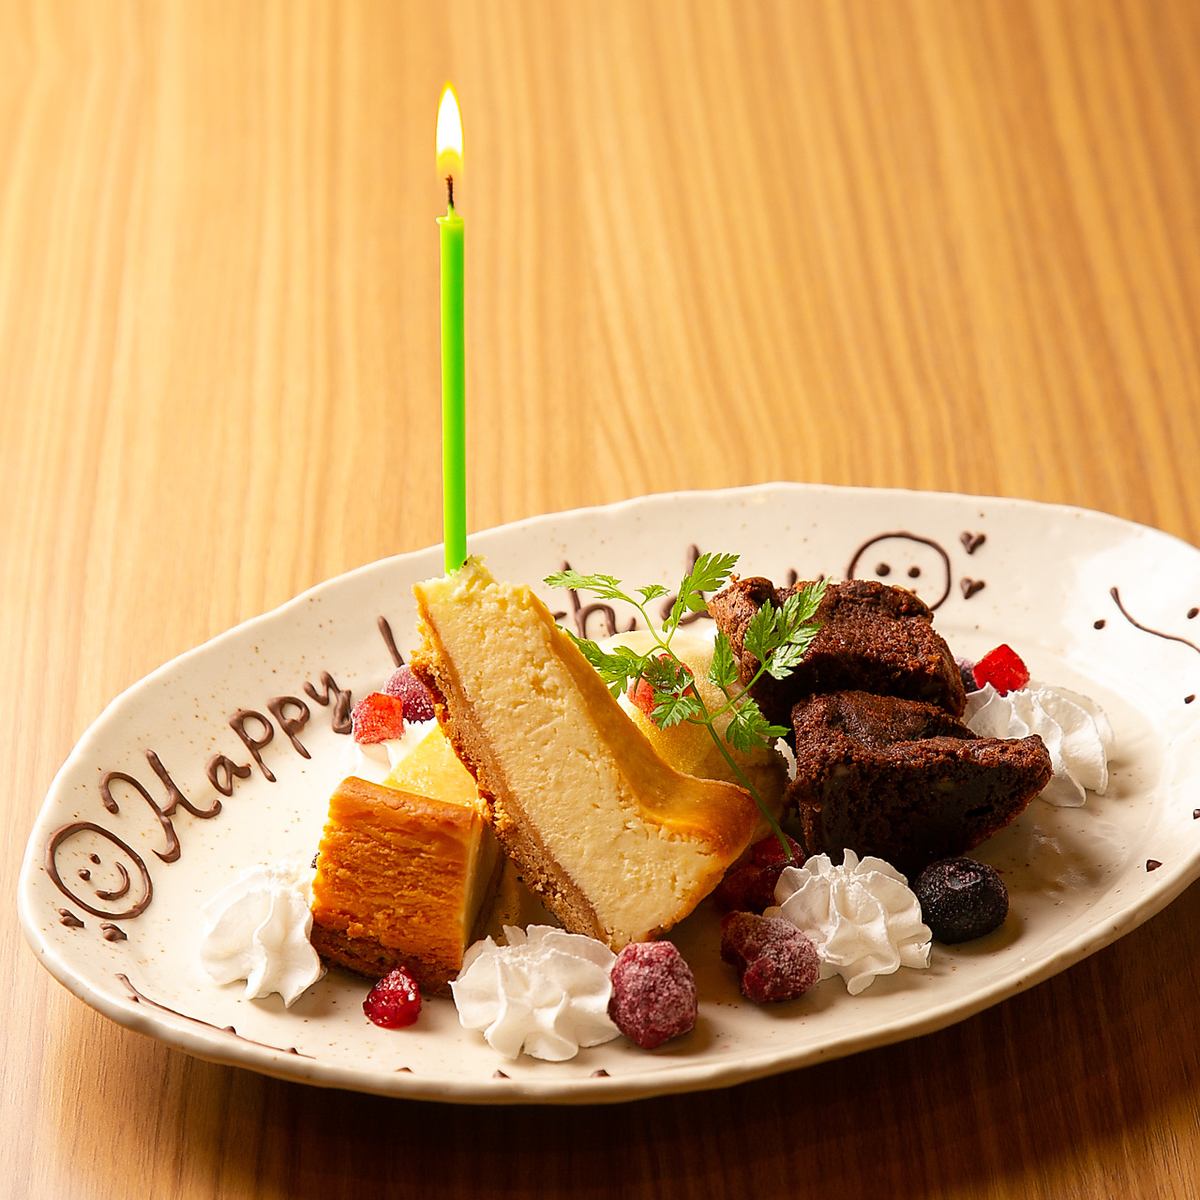 Customers who book a course will receive a birthday/anniversary plate as a gift♪